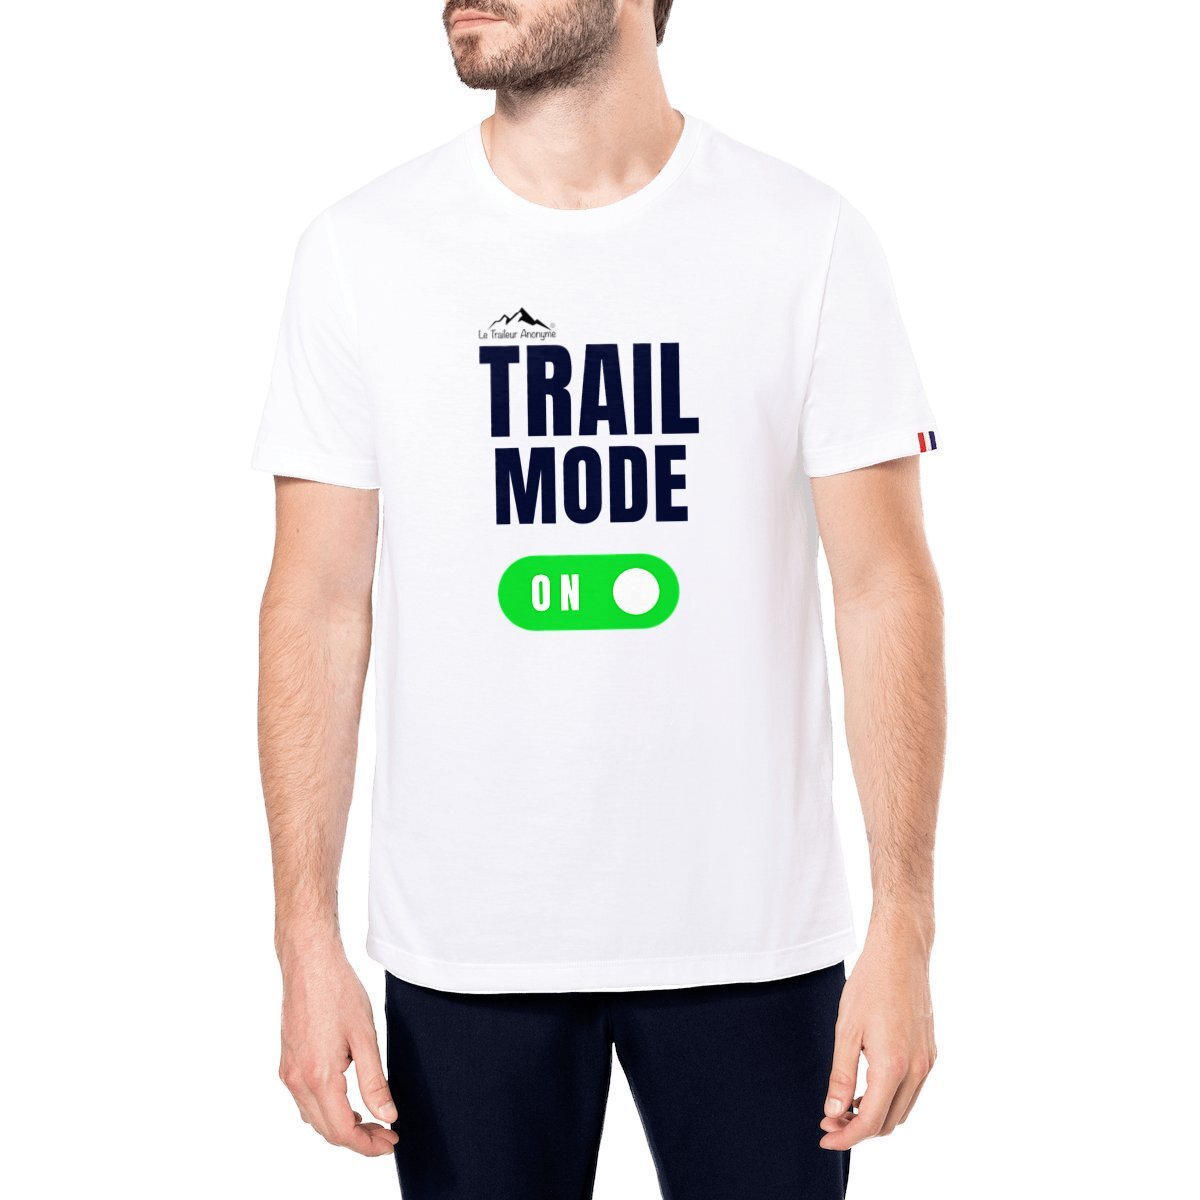 T-Shirt Coton Bio- 🇫🇷Made in France🇫🇷 - Homme - Collection "Trail Mode" (1510) - Le Traileur Anonyme